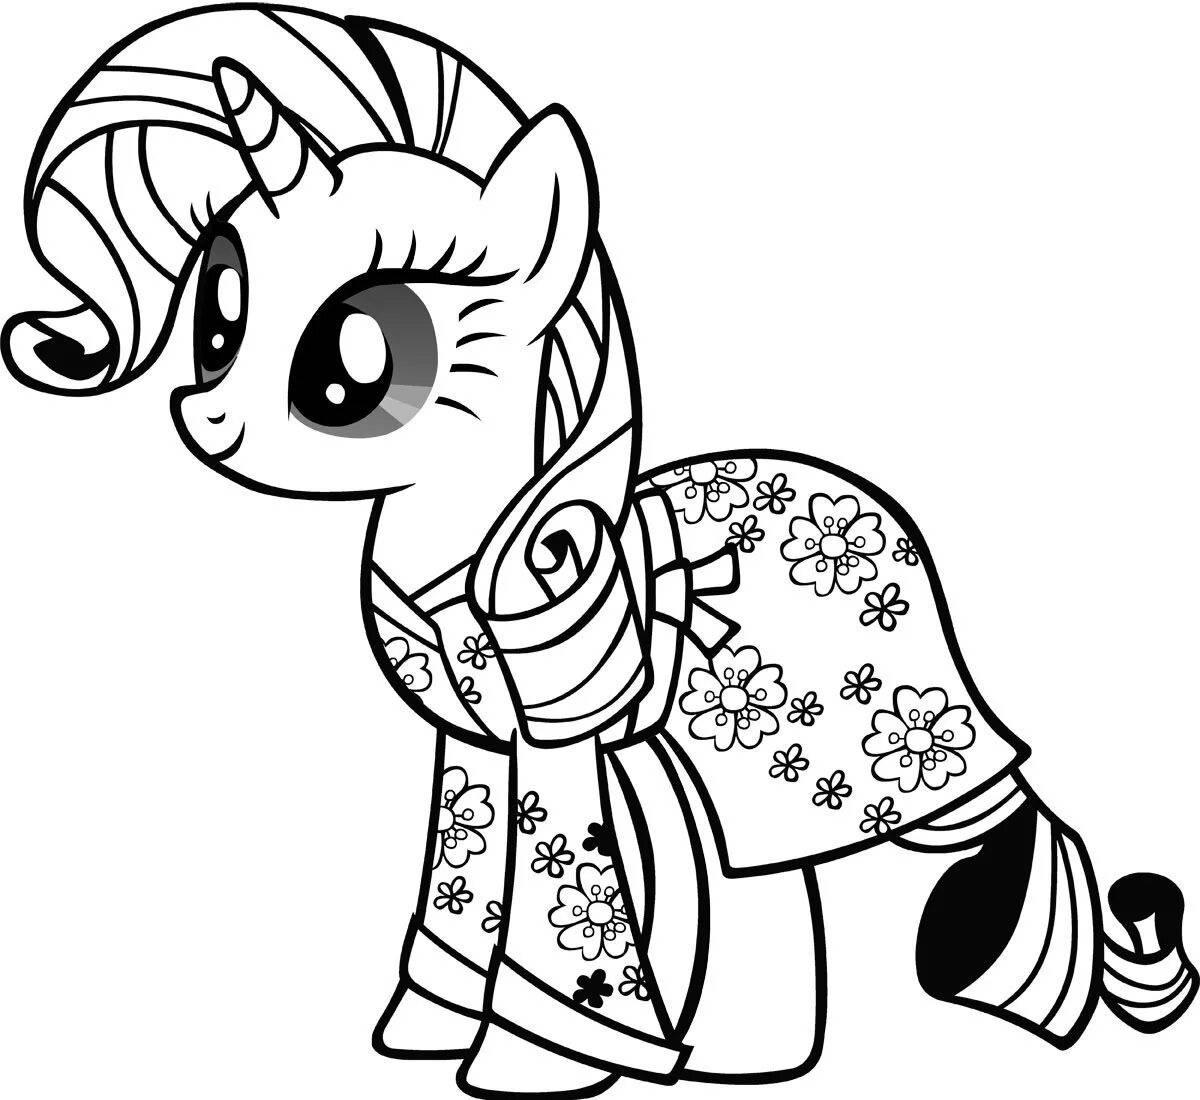 Coloring page bright little pony